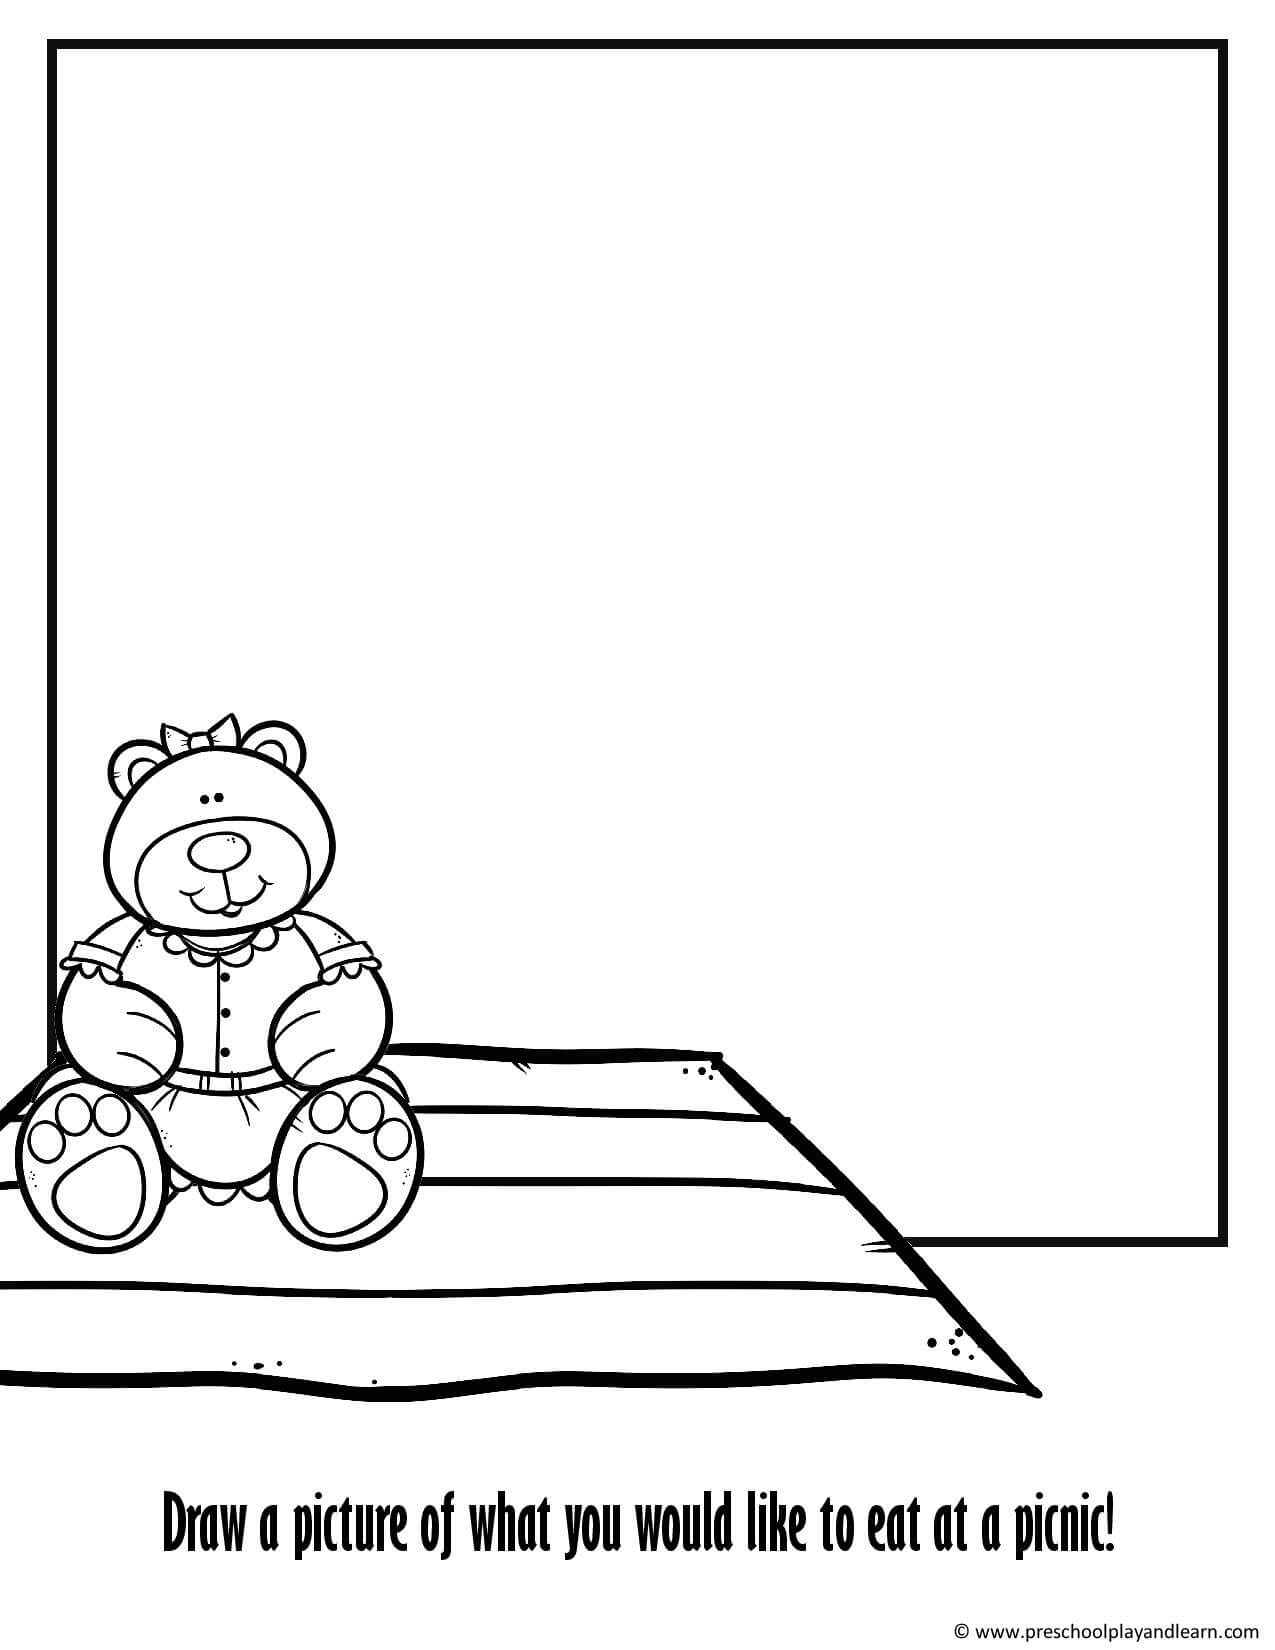 Cute teddy bear coloring pages